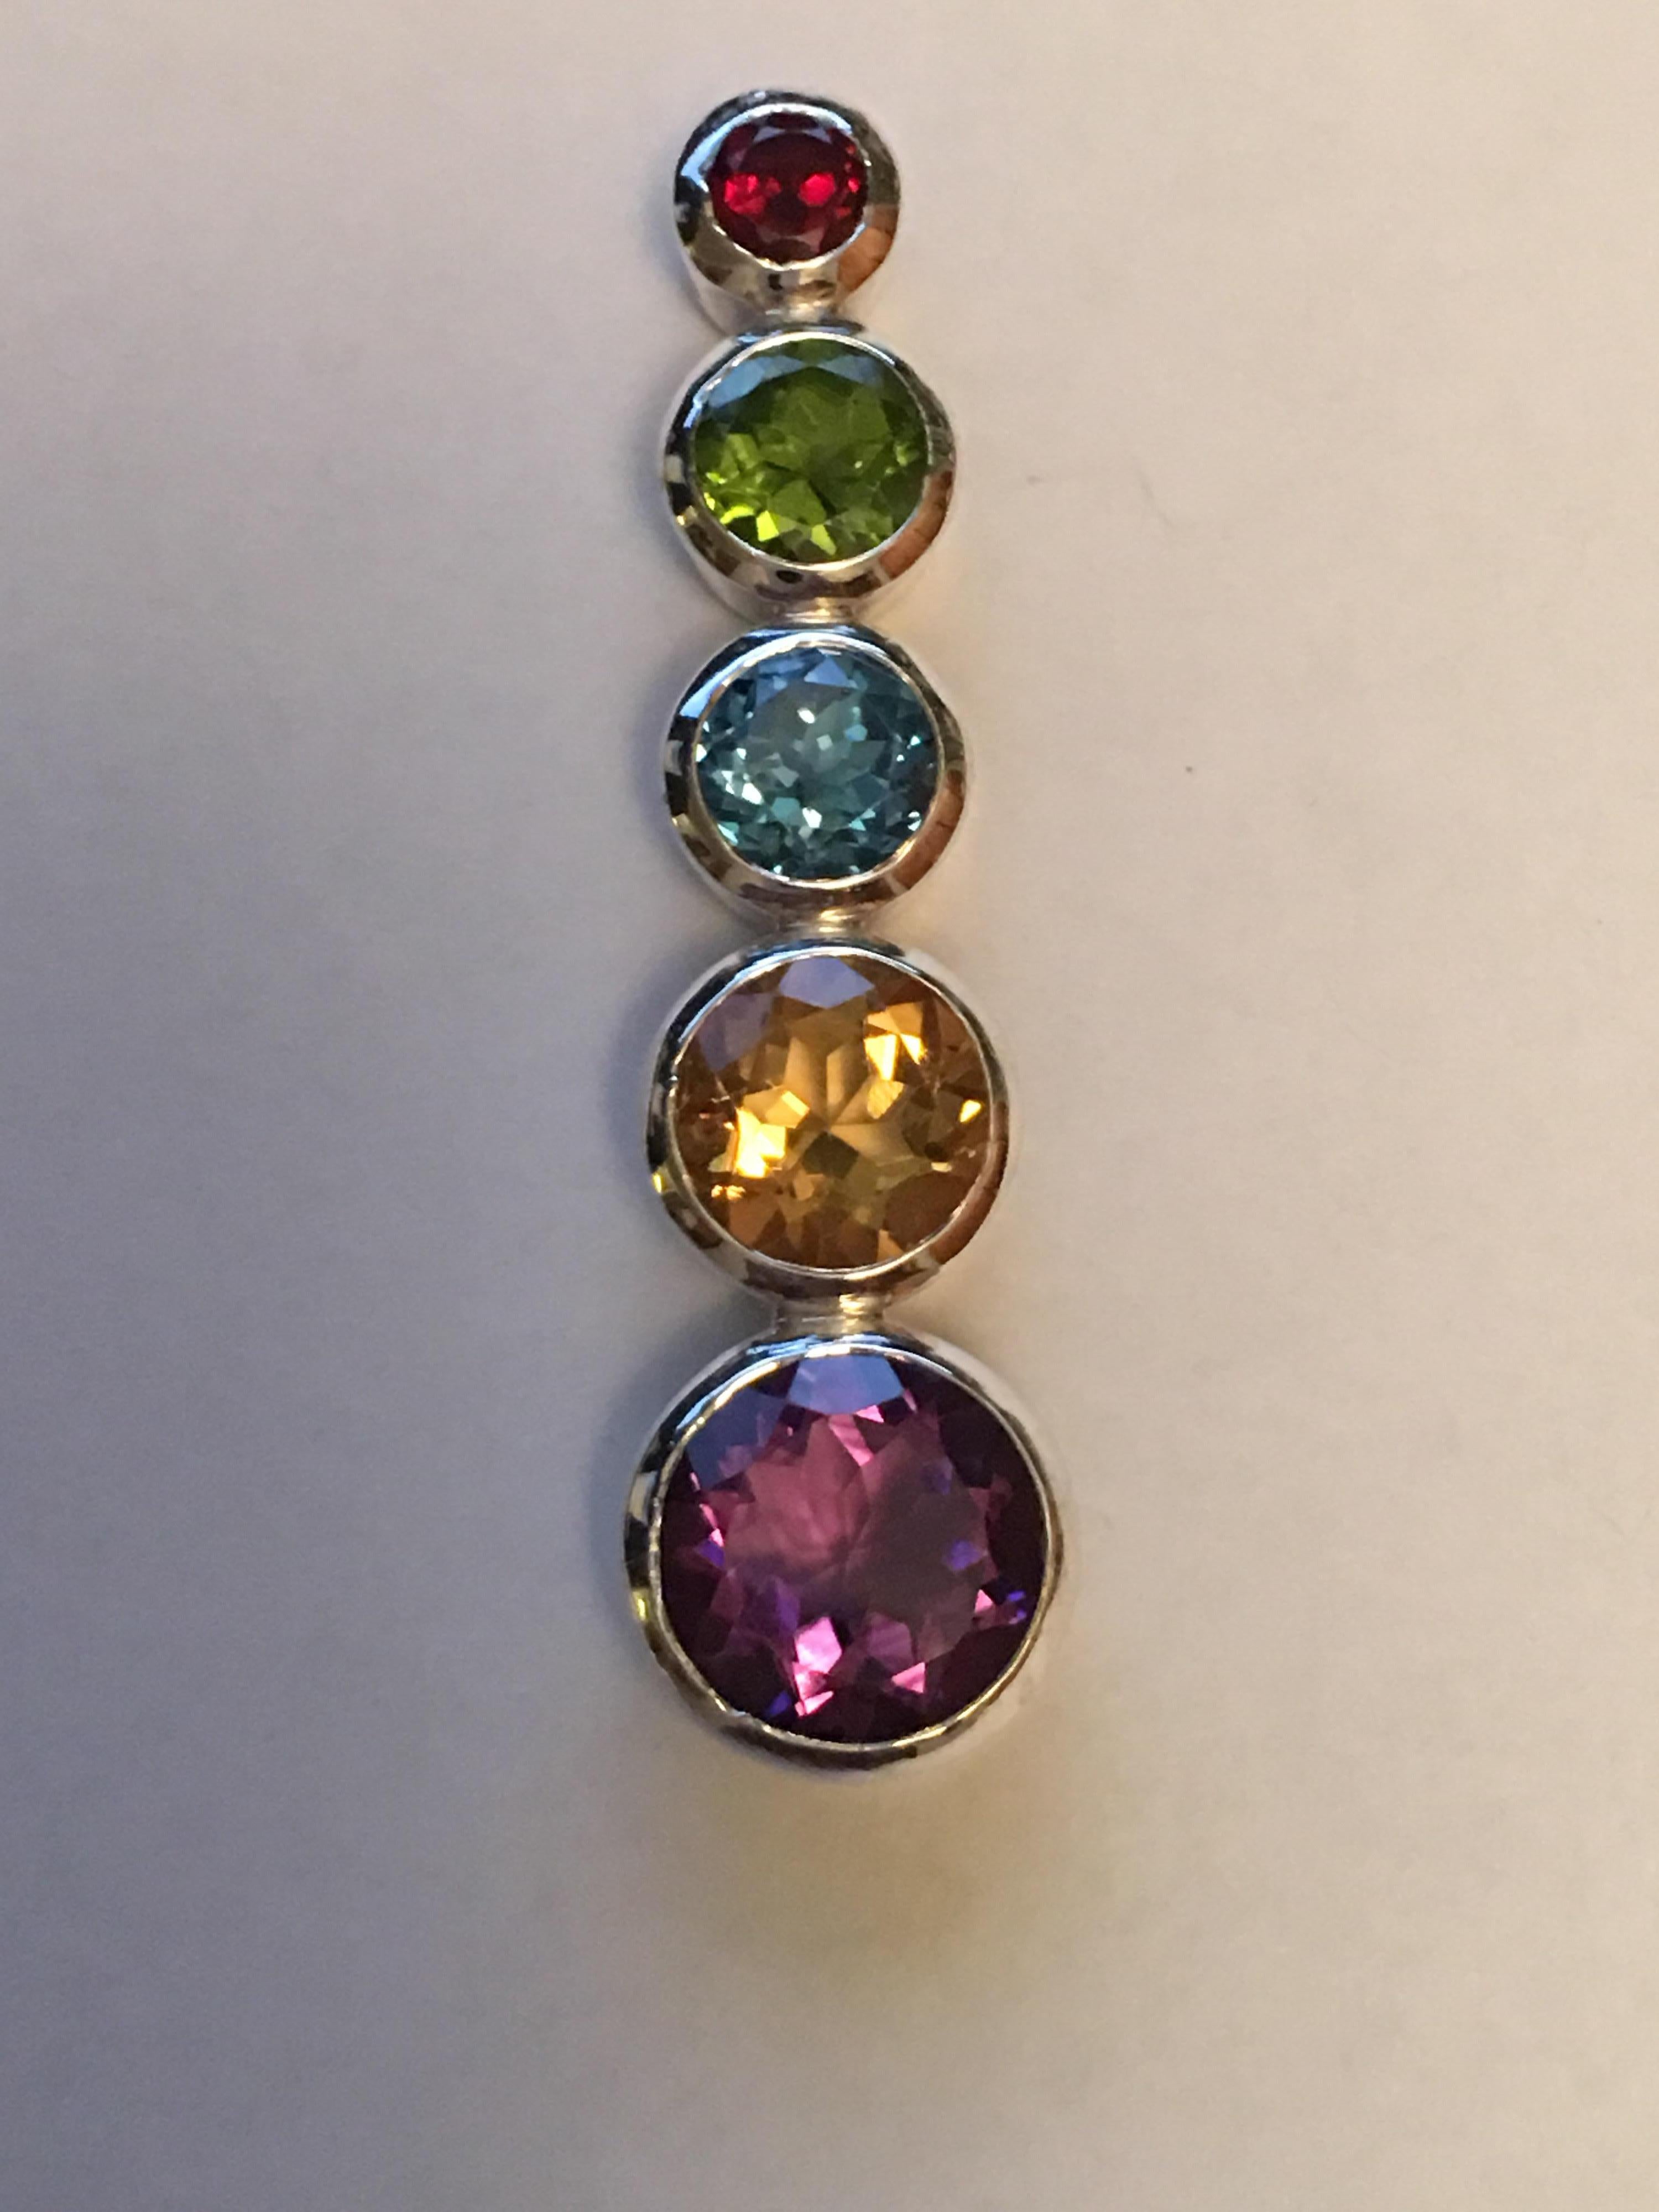 Natural stones Red Garnet 4 MM, Peridot 7 MM, Blue Topaz 7 MM, Citrine 9 MM and 11 MM Amethyst set in sterling silver. 
Hand crafted one of a kind pendant.
All stone are hand cut and polished.
Chakra Pendant can be worn on leather band or sterling